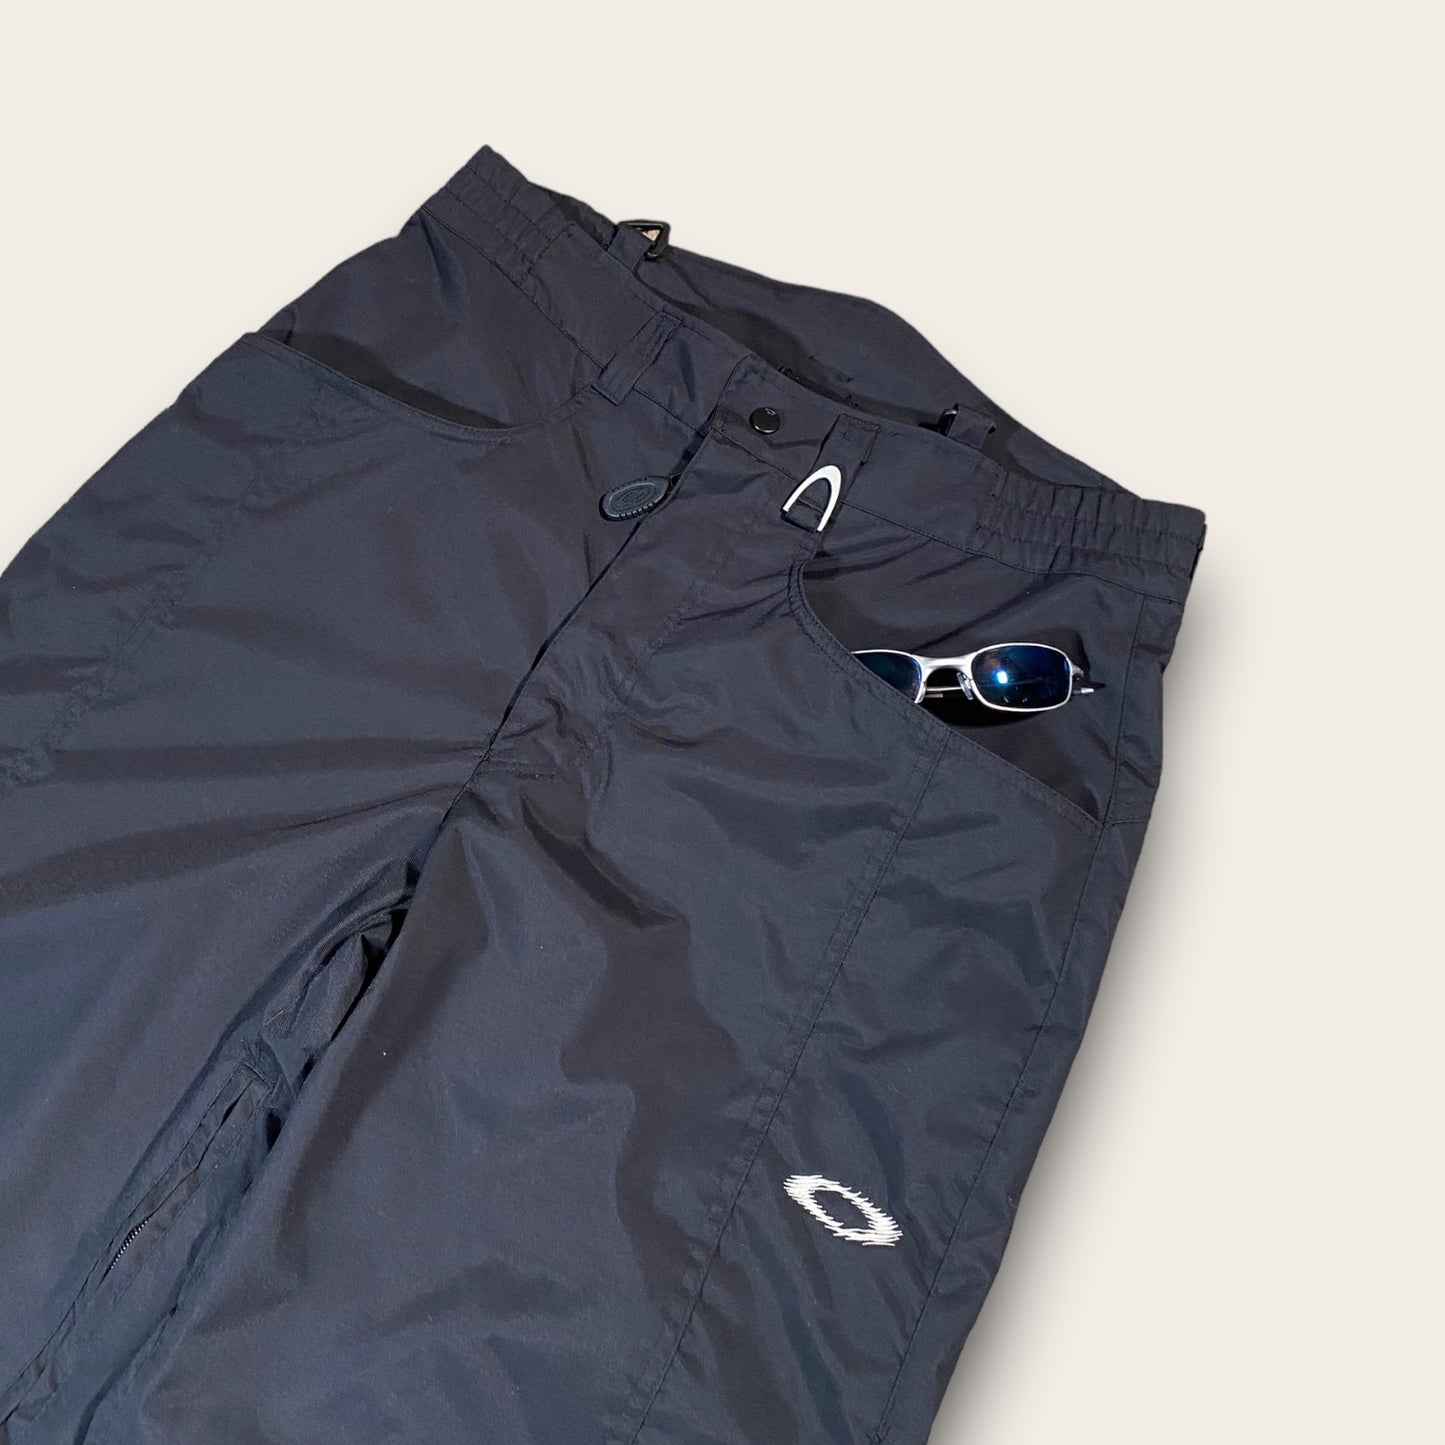 Oakley Software 2000’s Insulated Cargos M